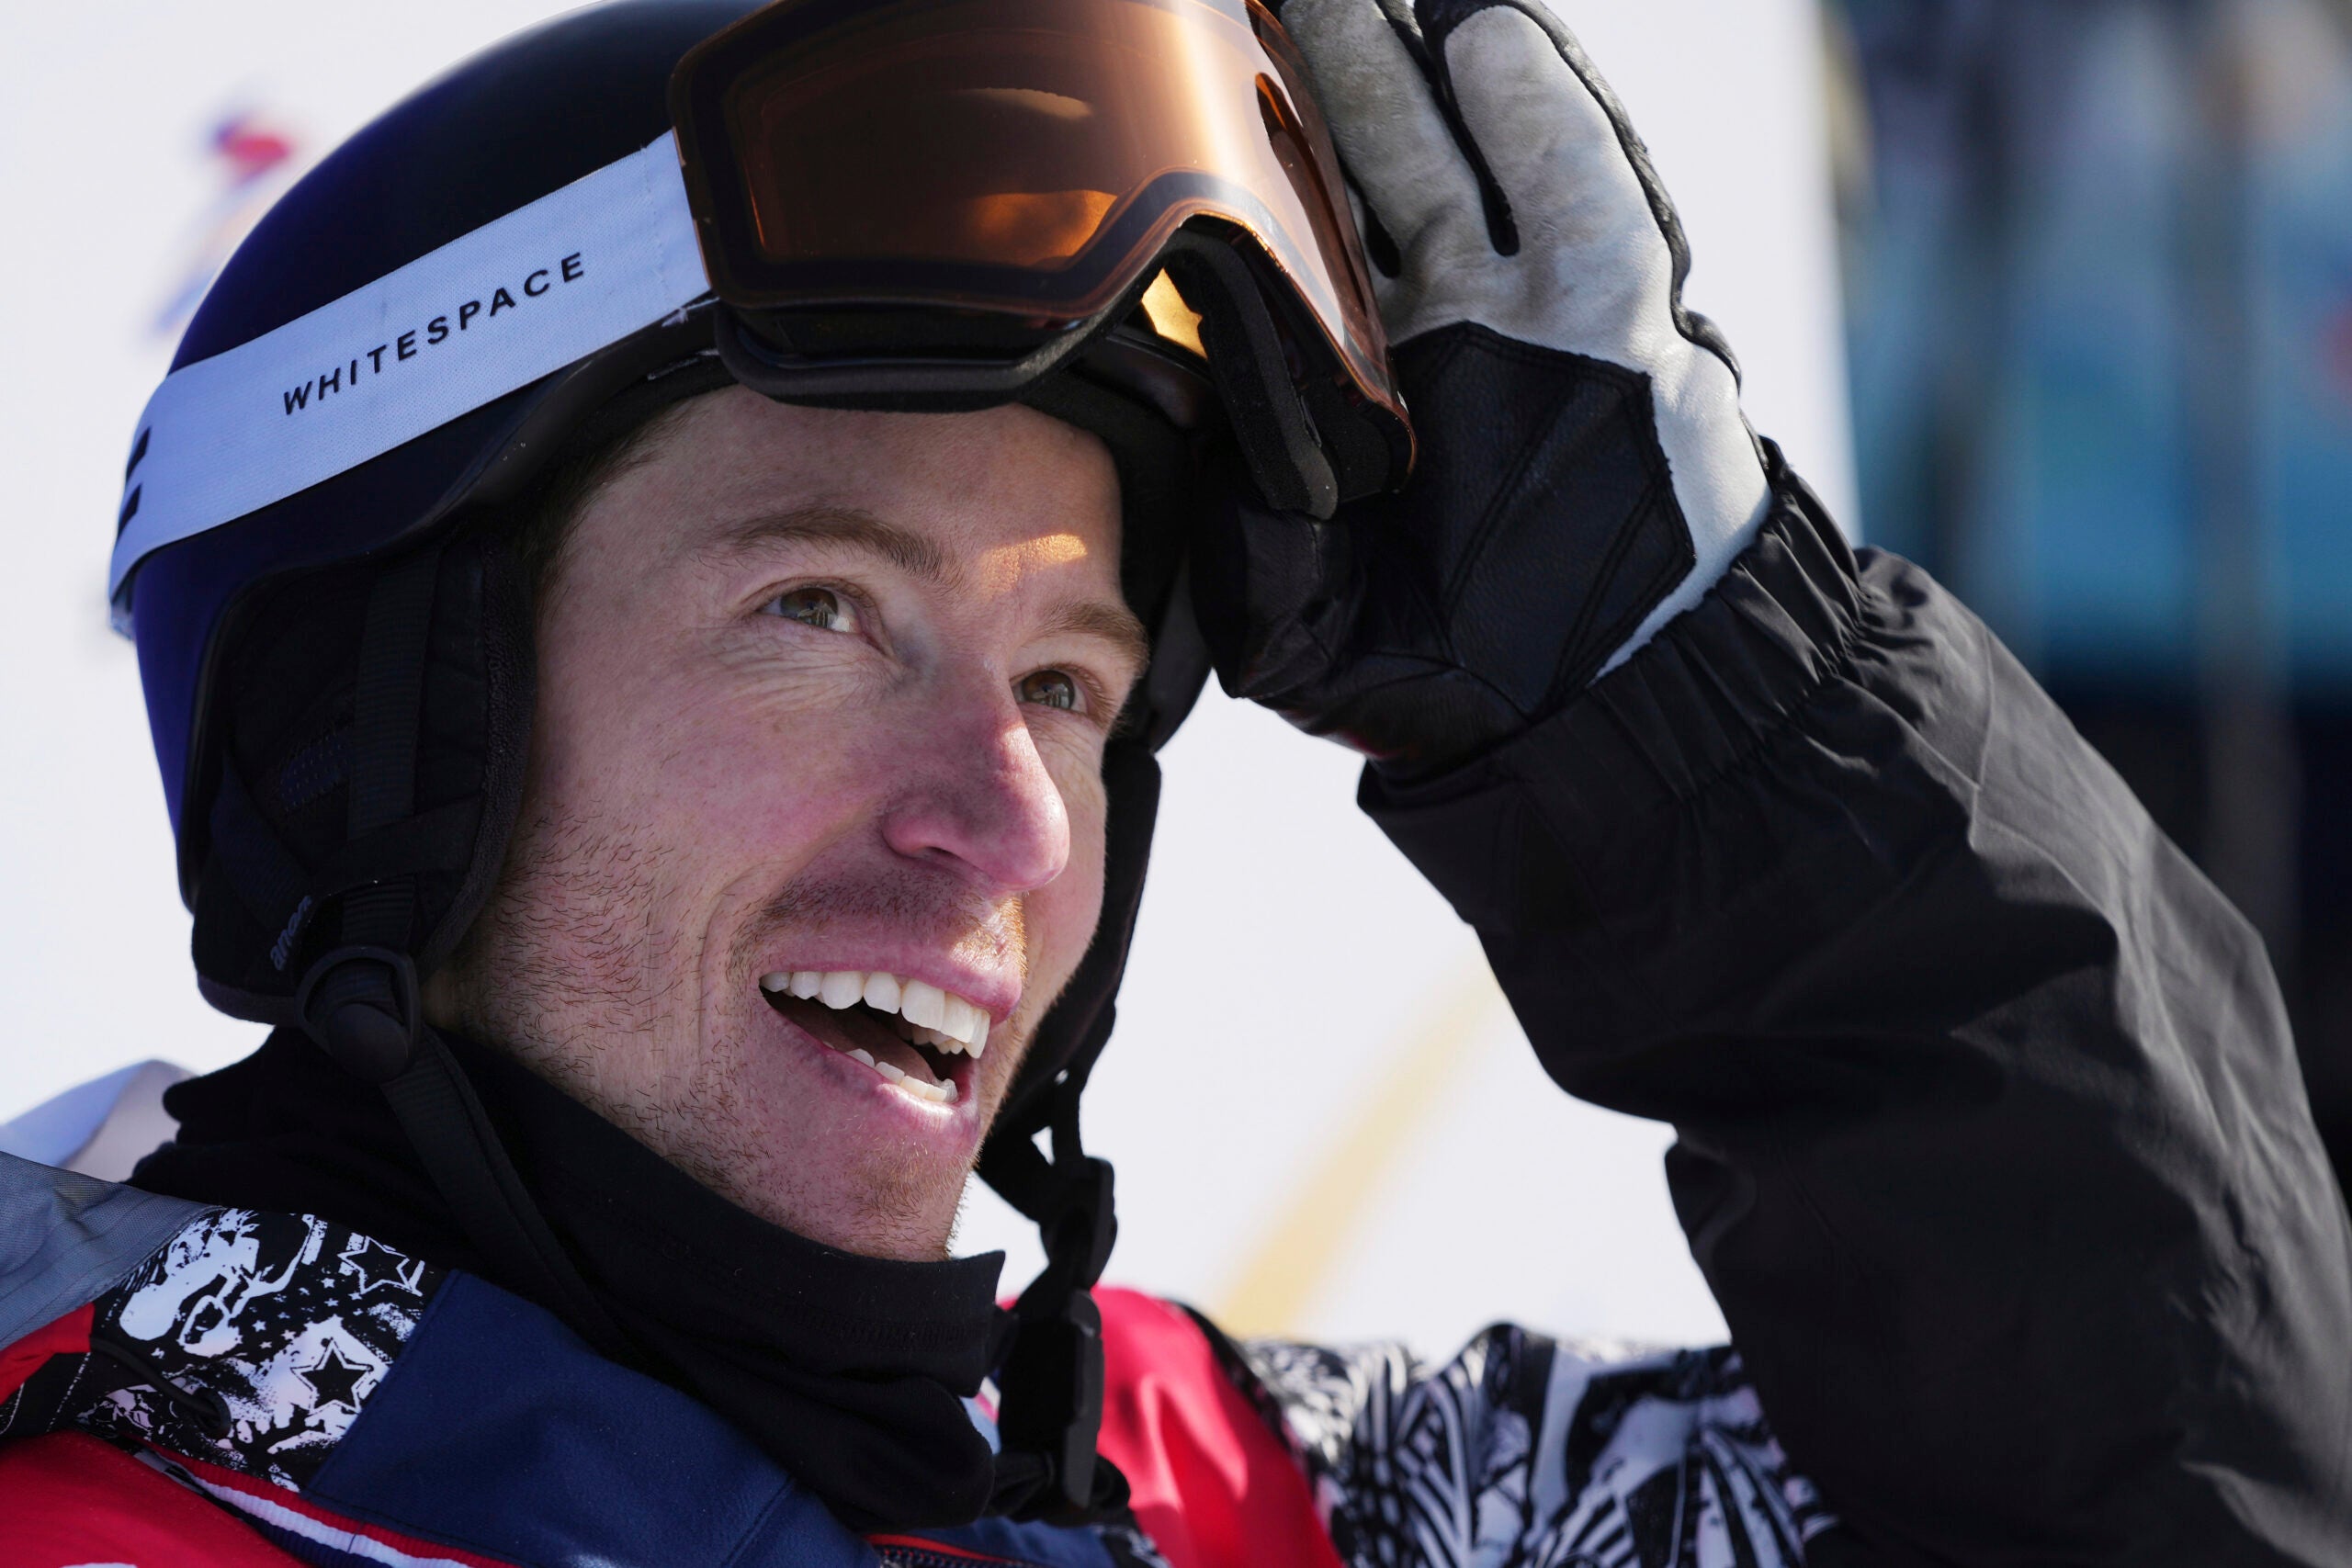 Watch: An emotional Shaun White finishes 4th in last Olympic Games